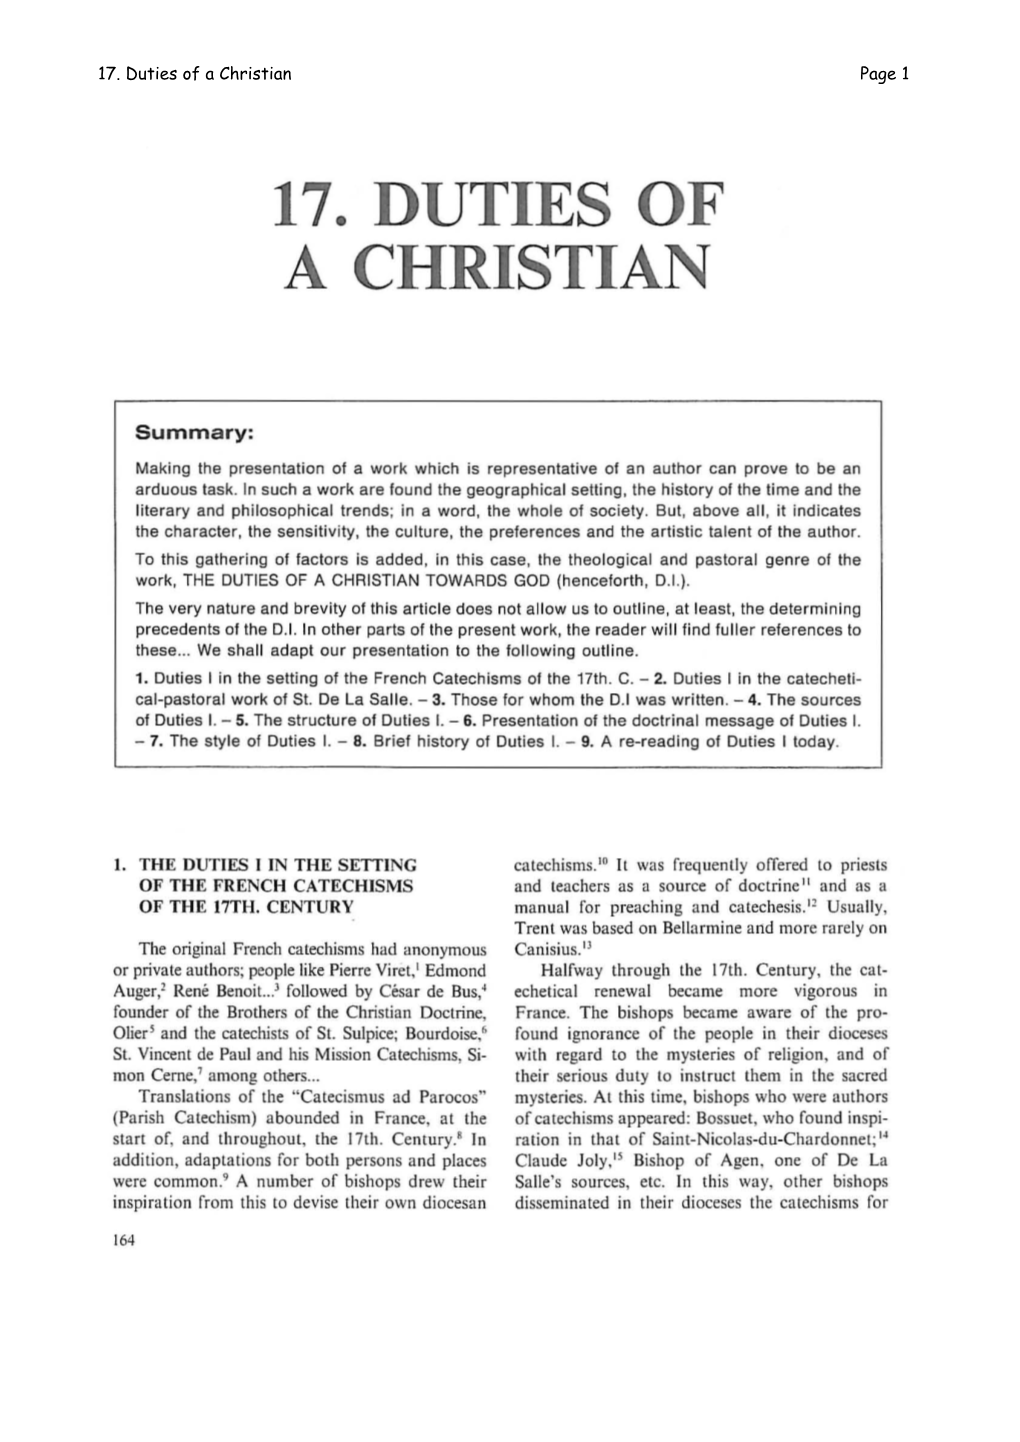 Duties of a Christian Page 1